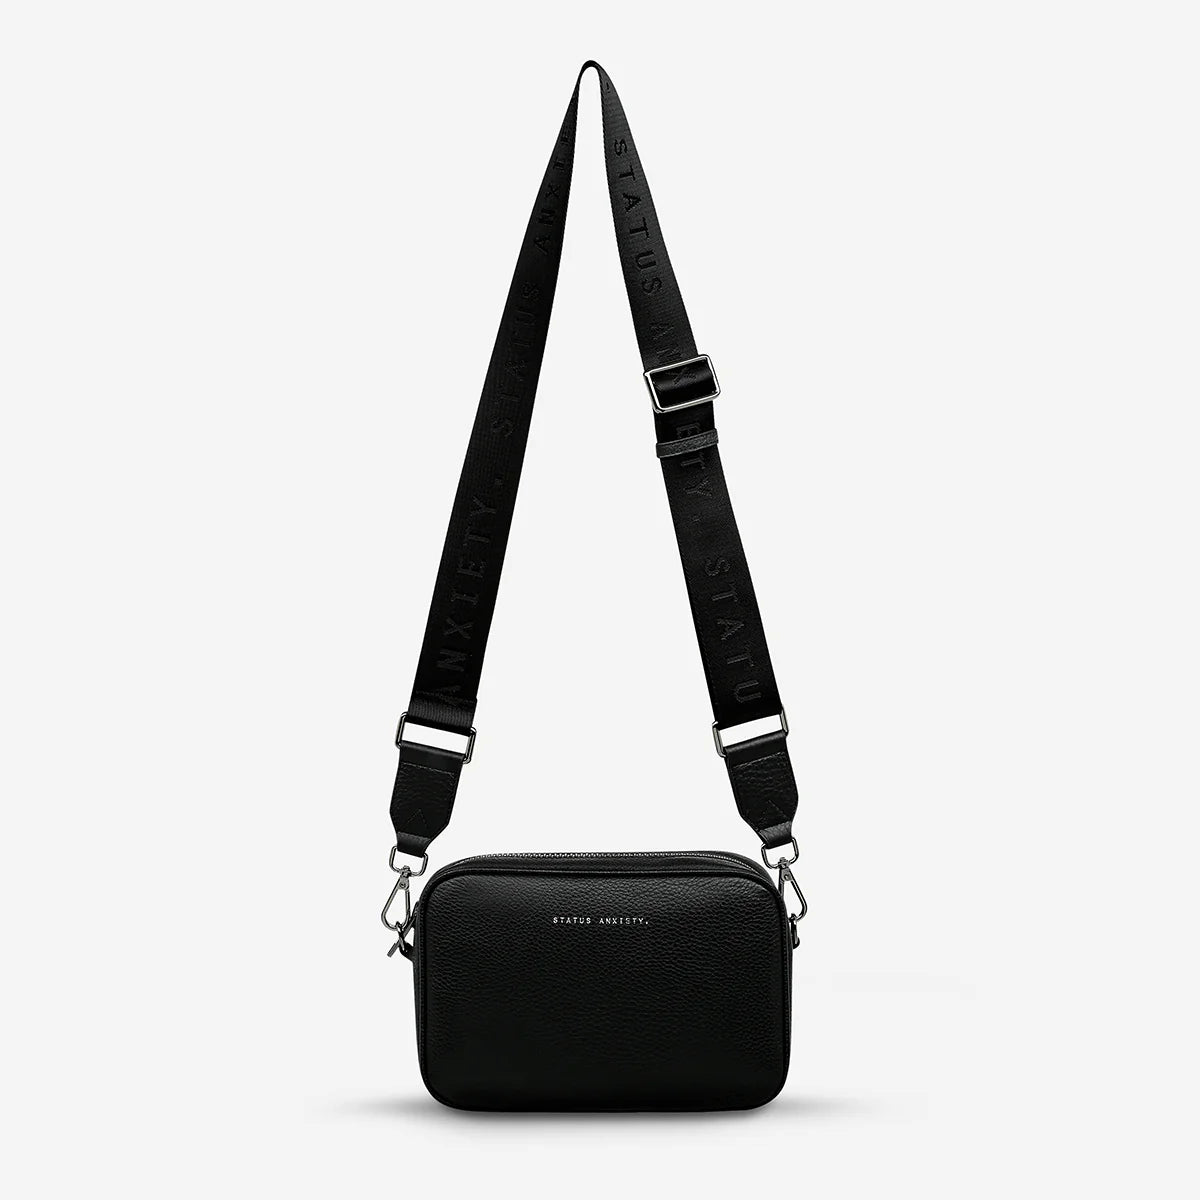 Status anxiety plunder with webbed strap - black